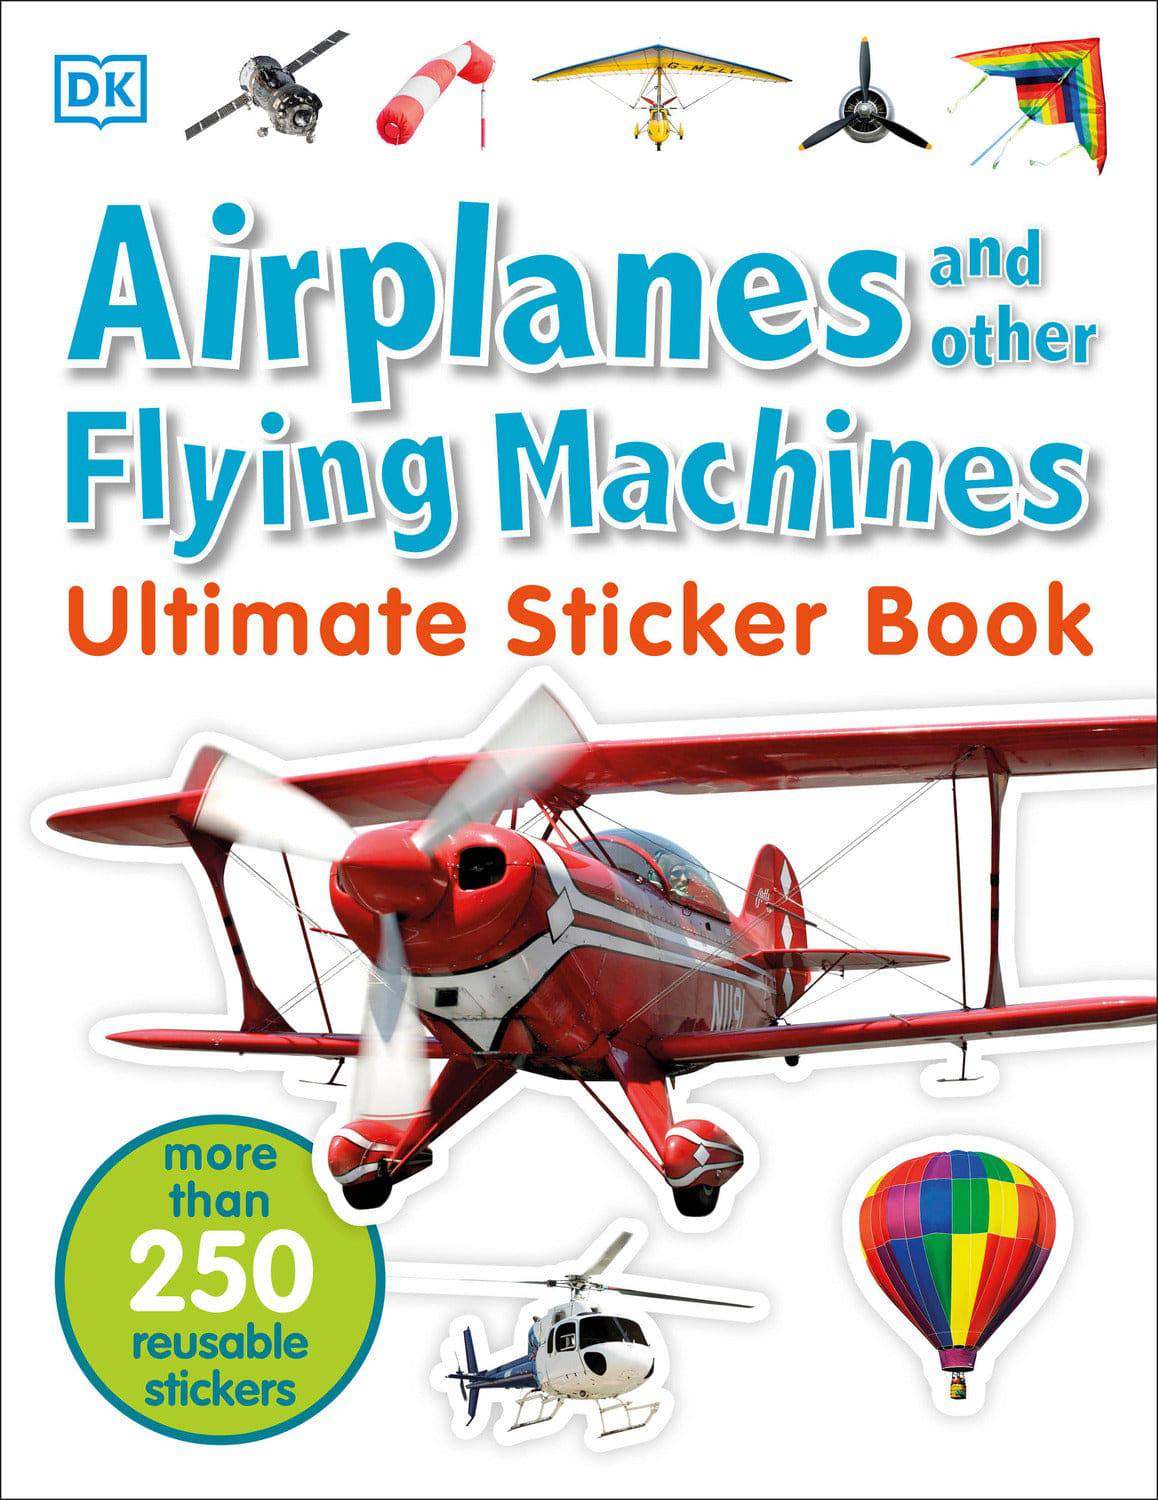 USB AIRPLANES AND OTHER FLYING - A Child's Delight